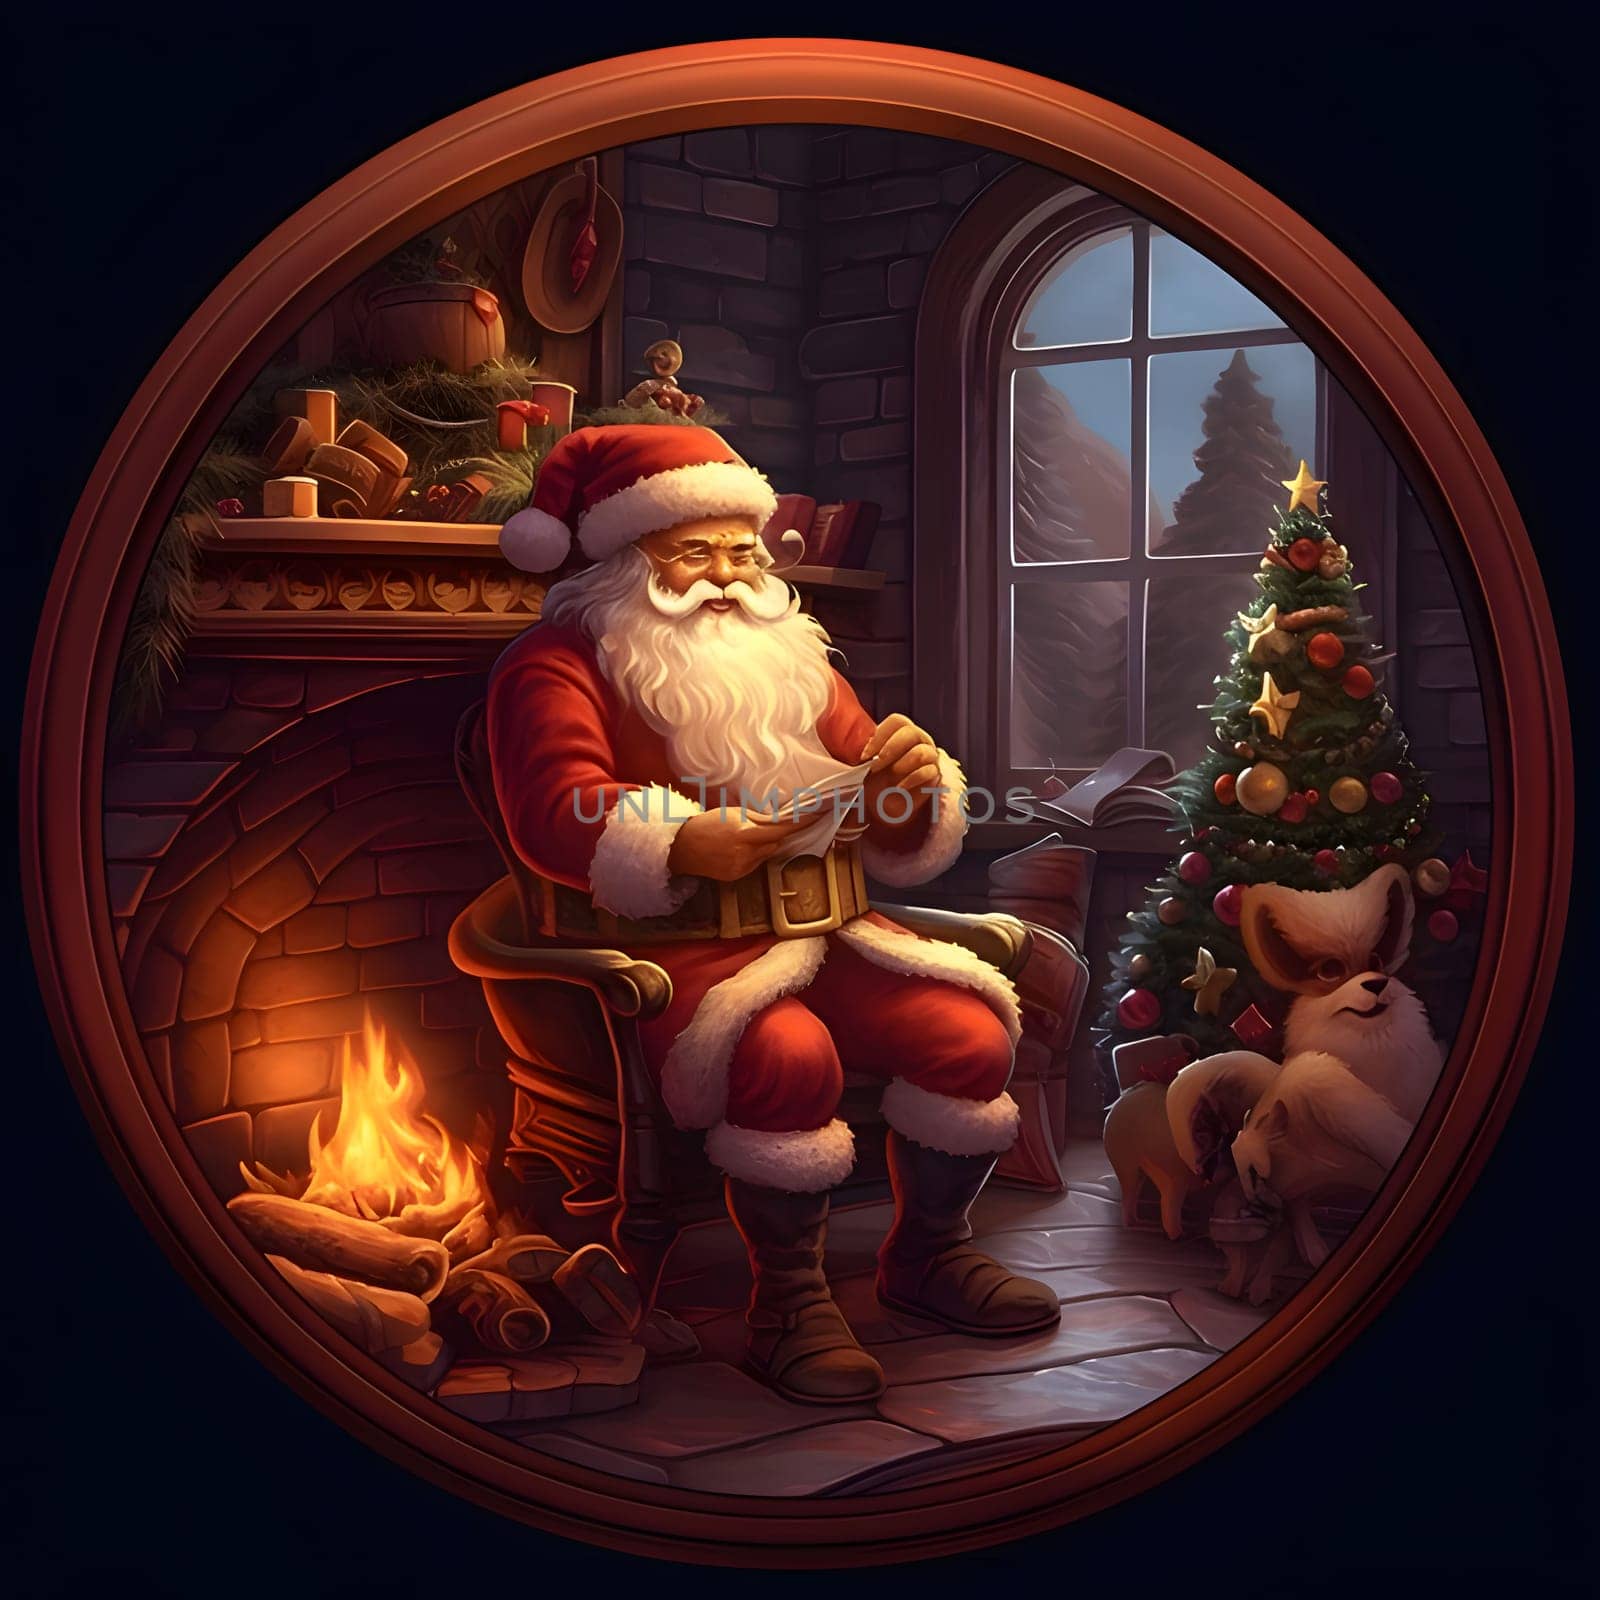 Illustration of Santa Claus reading a letter by the fireplace in a circle. Xmas tree as a symbol of Christmas of the birth of the Savior. A time of joy and celebration.